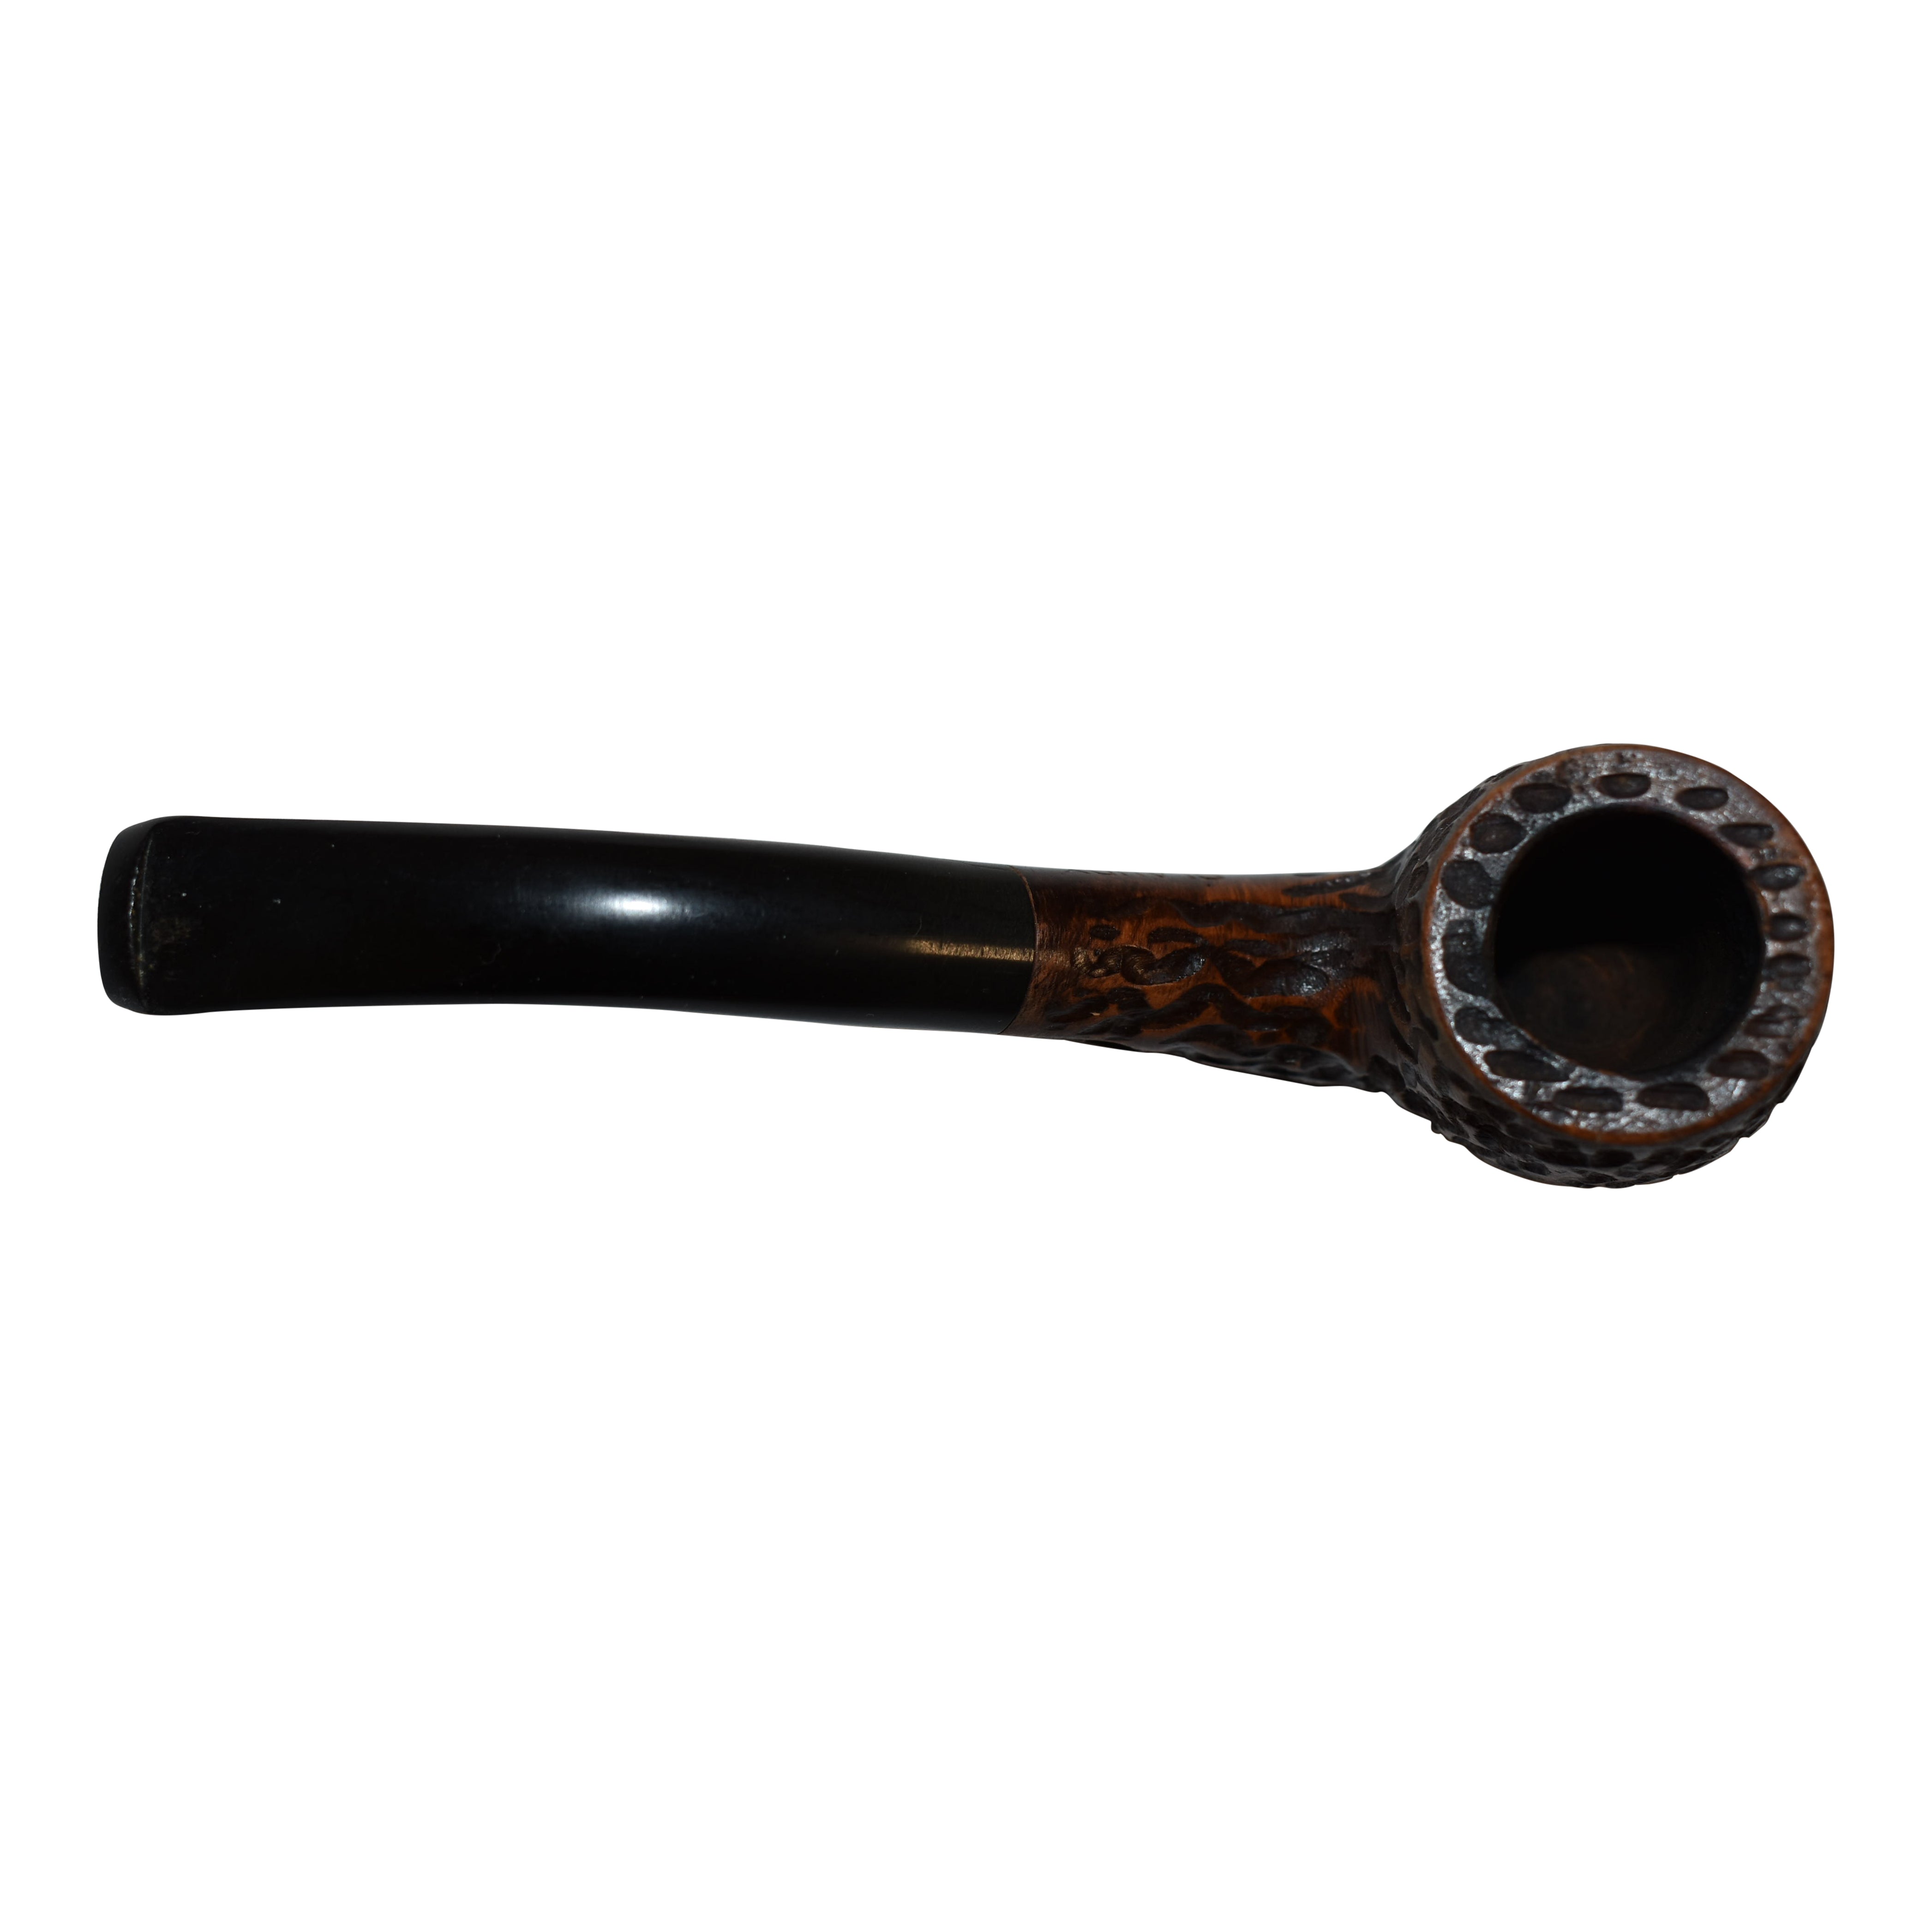 Textured Briar Wood Olaudy Tobacco Pipe